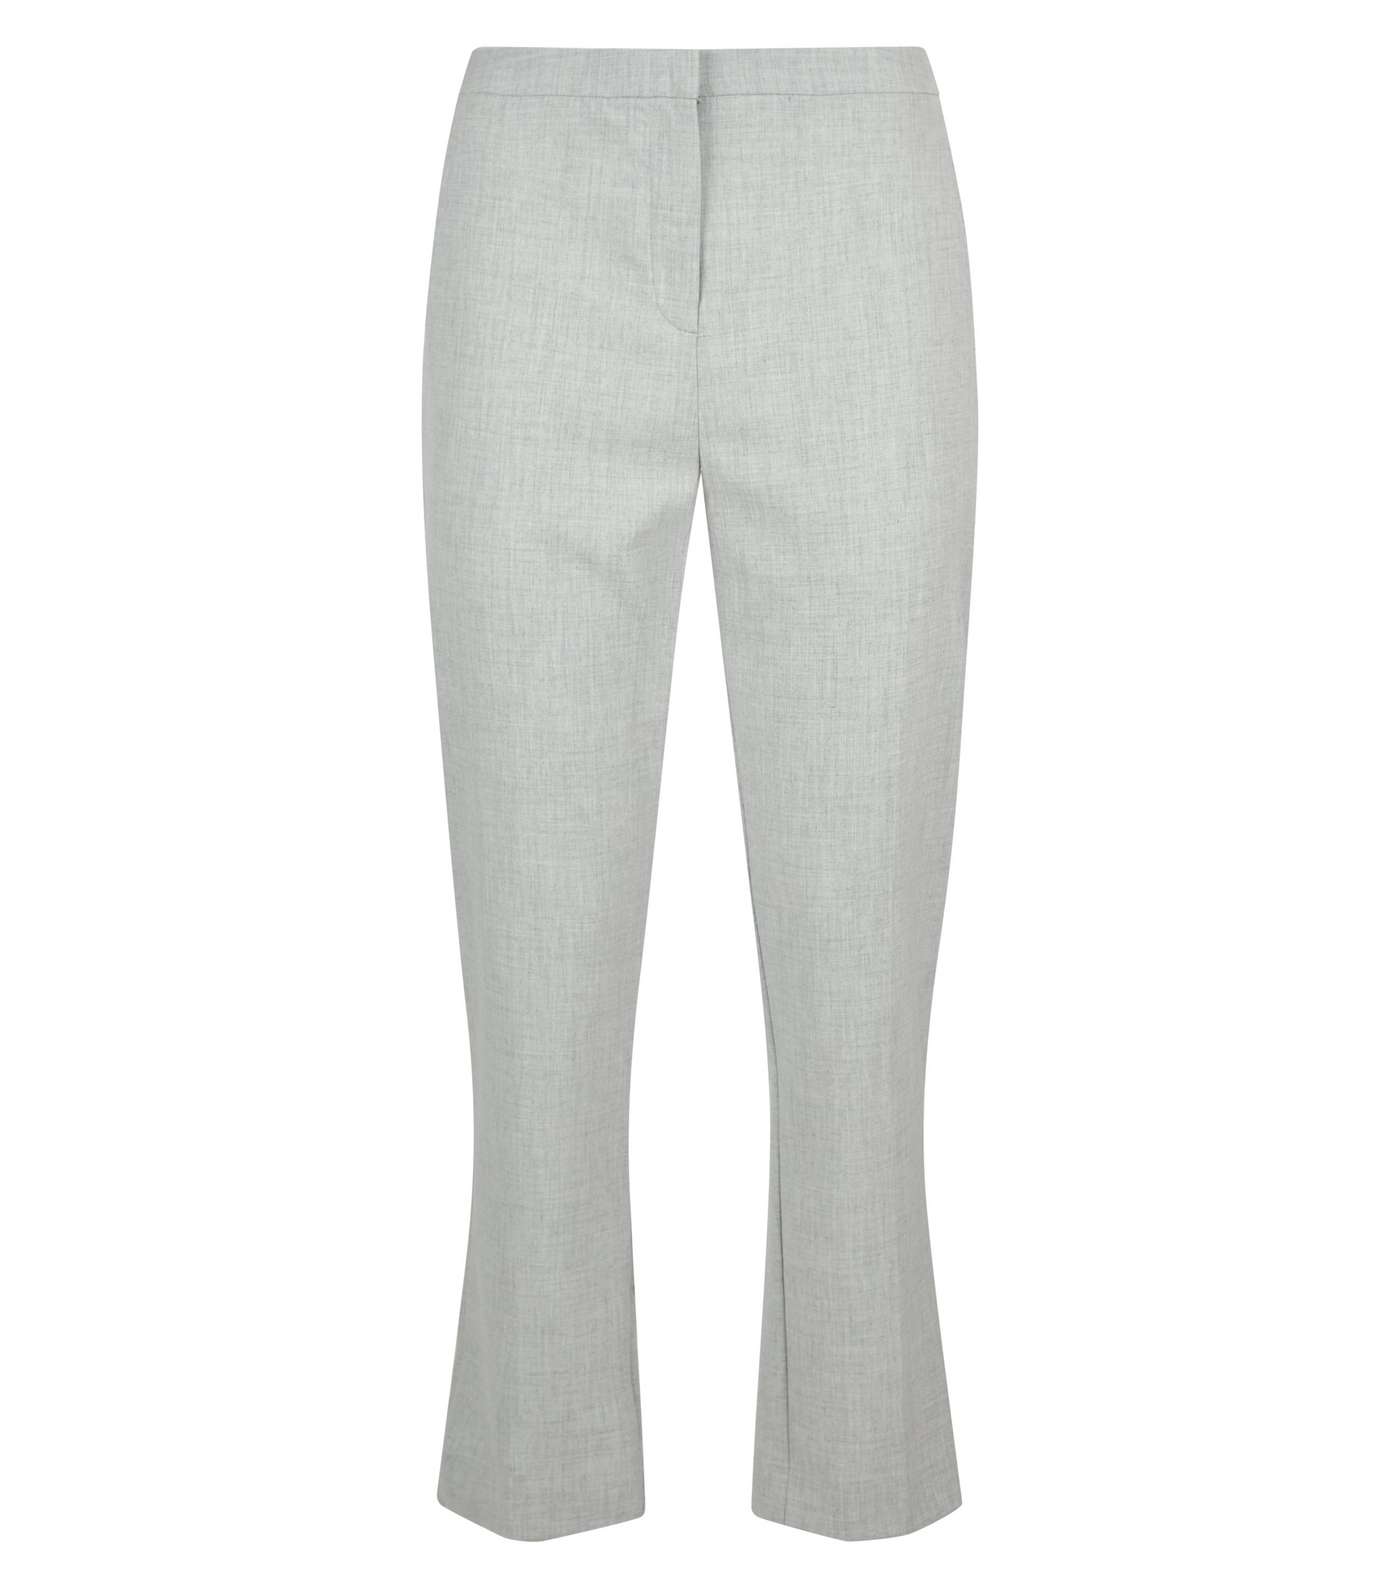 Pale Grey Marl Tapered Trousers Image 4